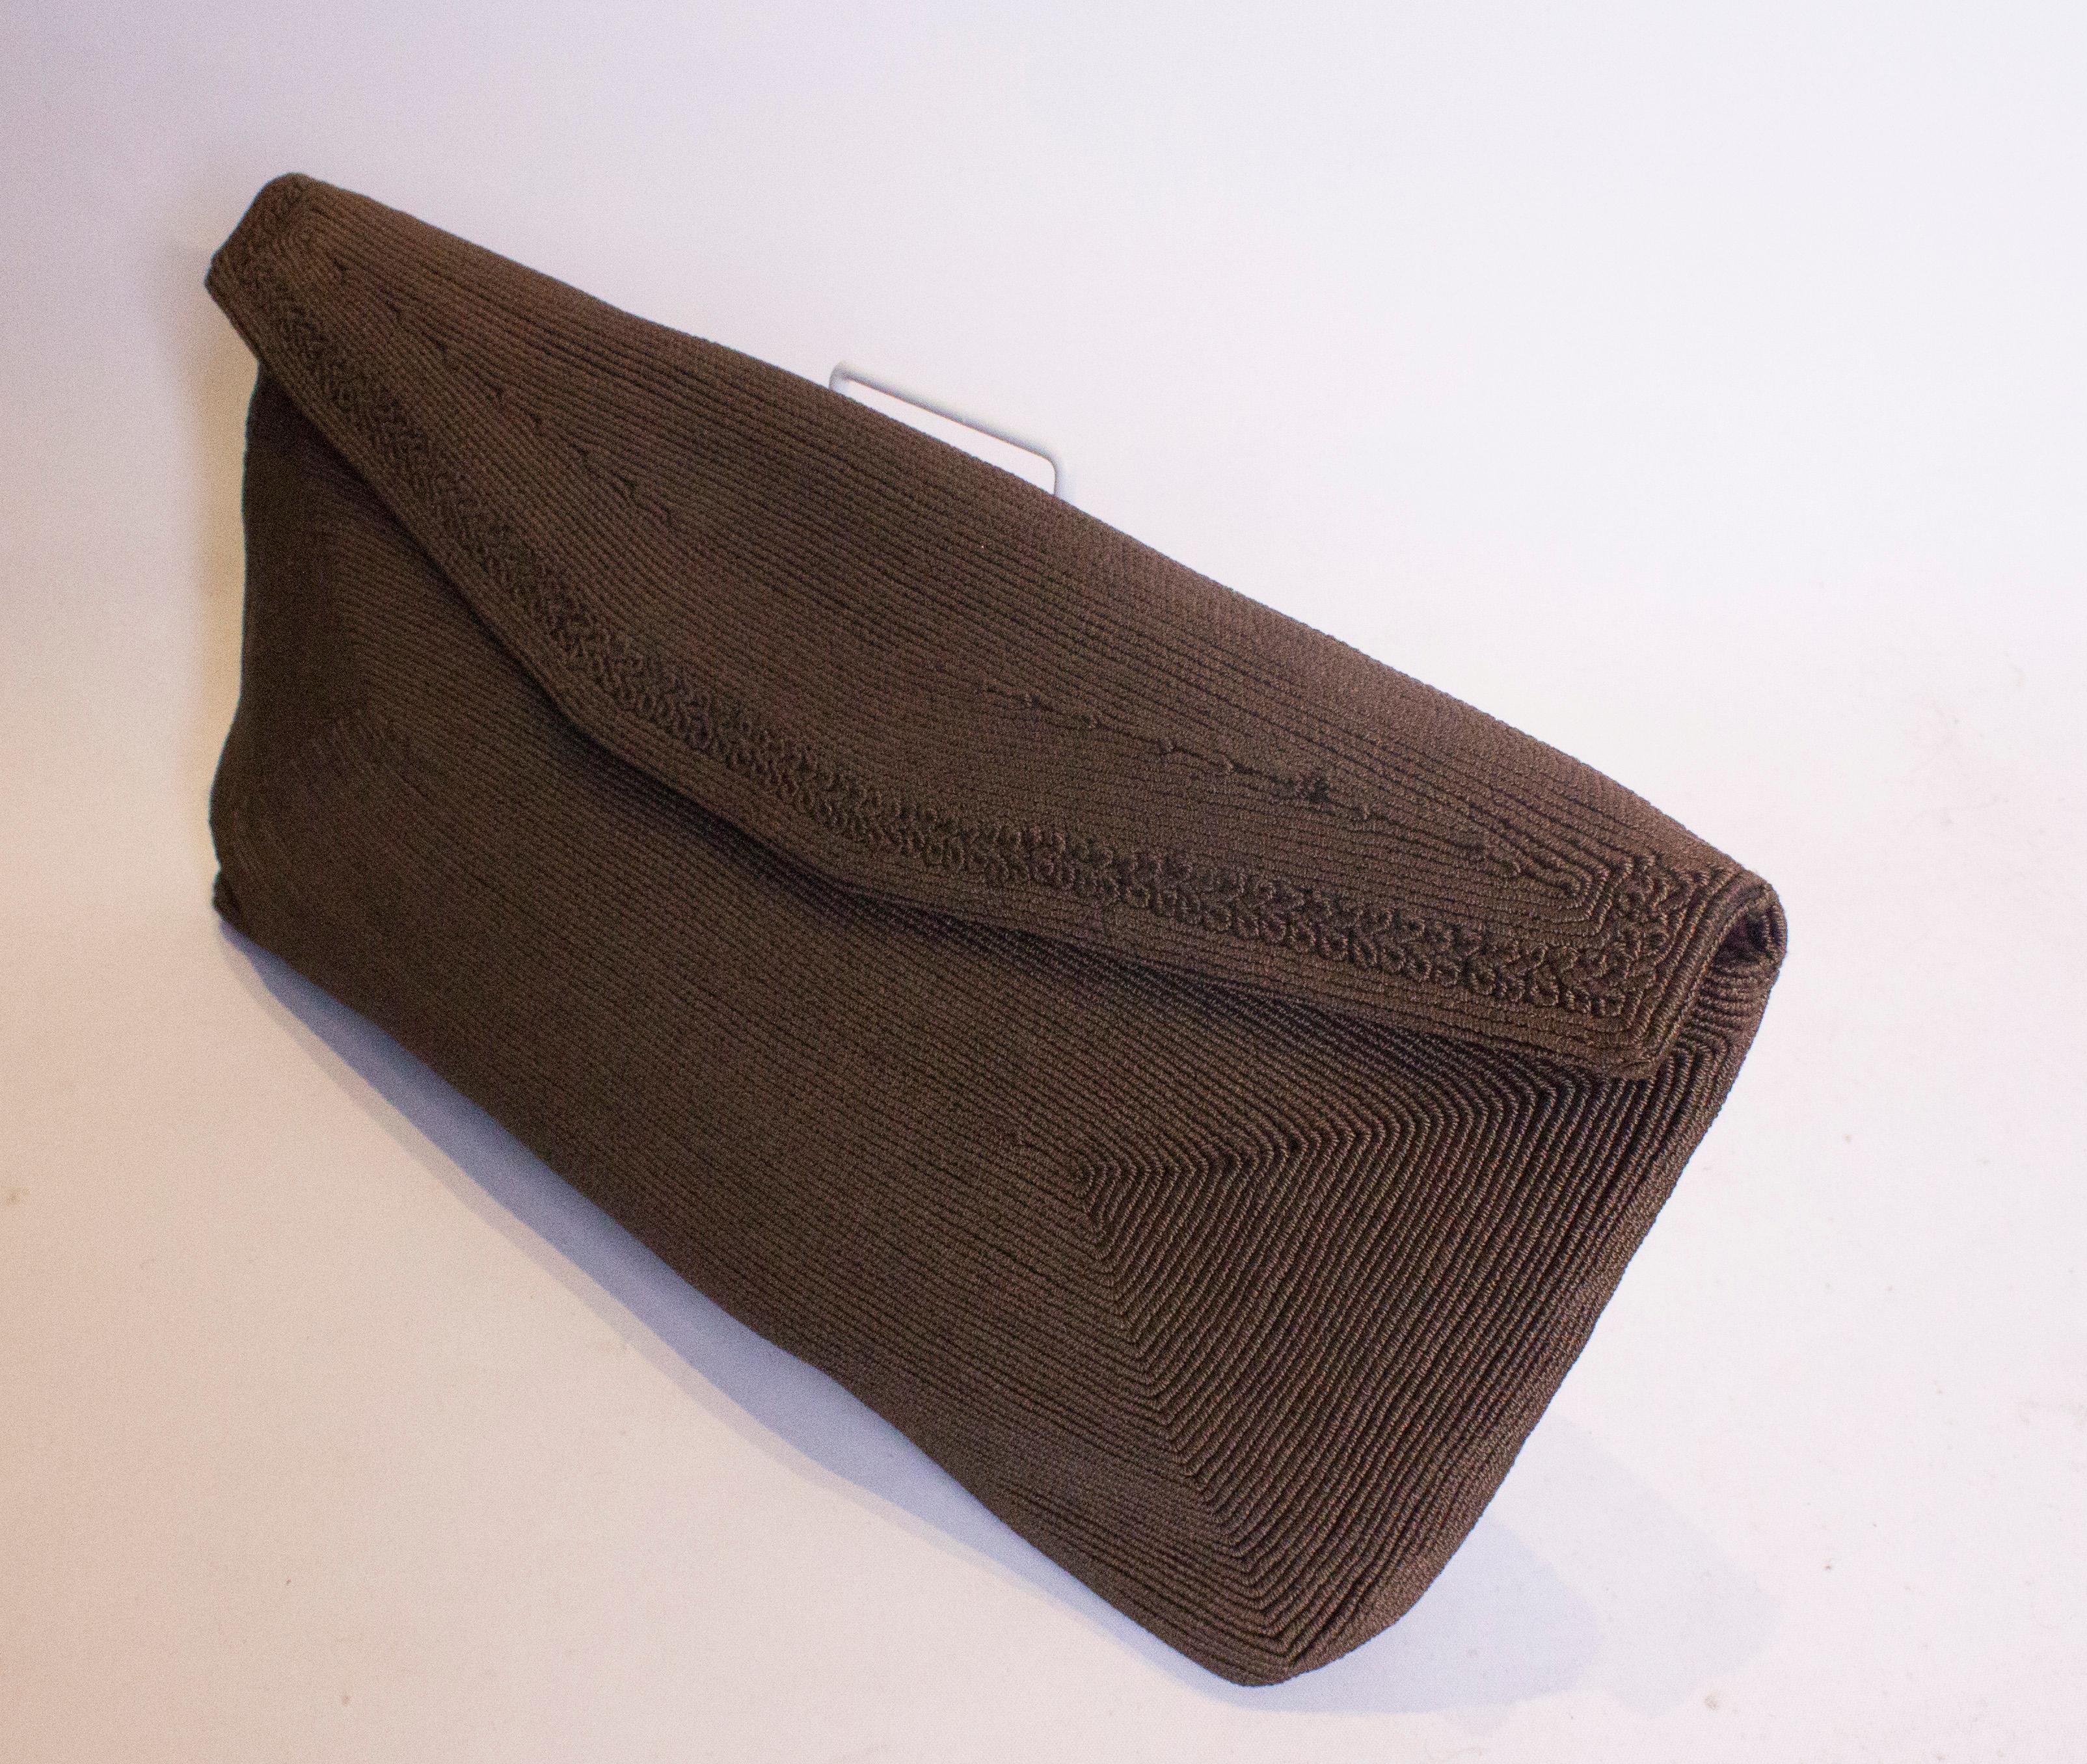 A chic vintage clutch handbag by Corde.This large brown envelope bag has a flap over front with a poper fastening and one internal pouch pocket.  Measurements: Width 15'', height 7'' depth 2''